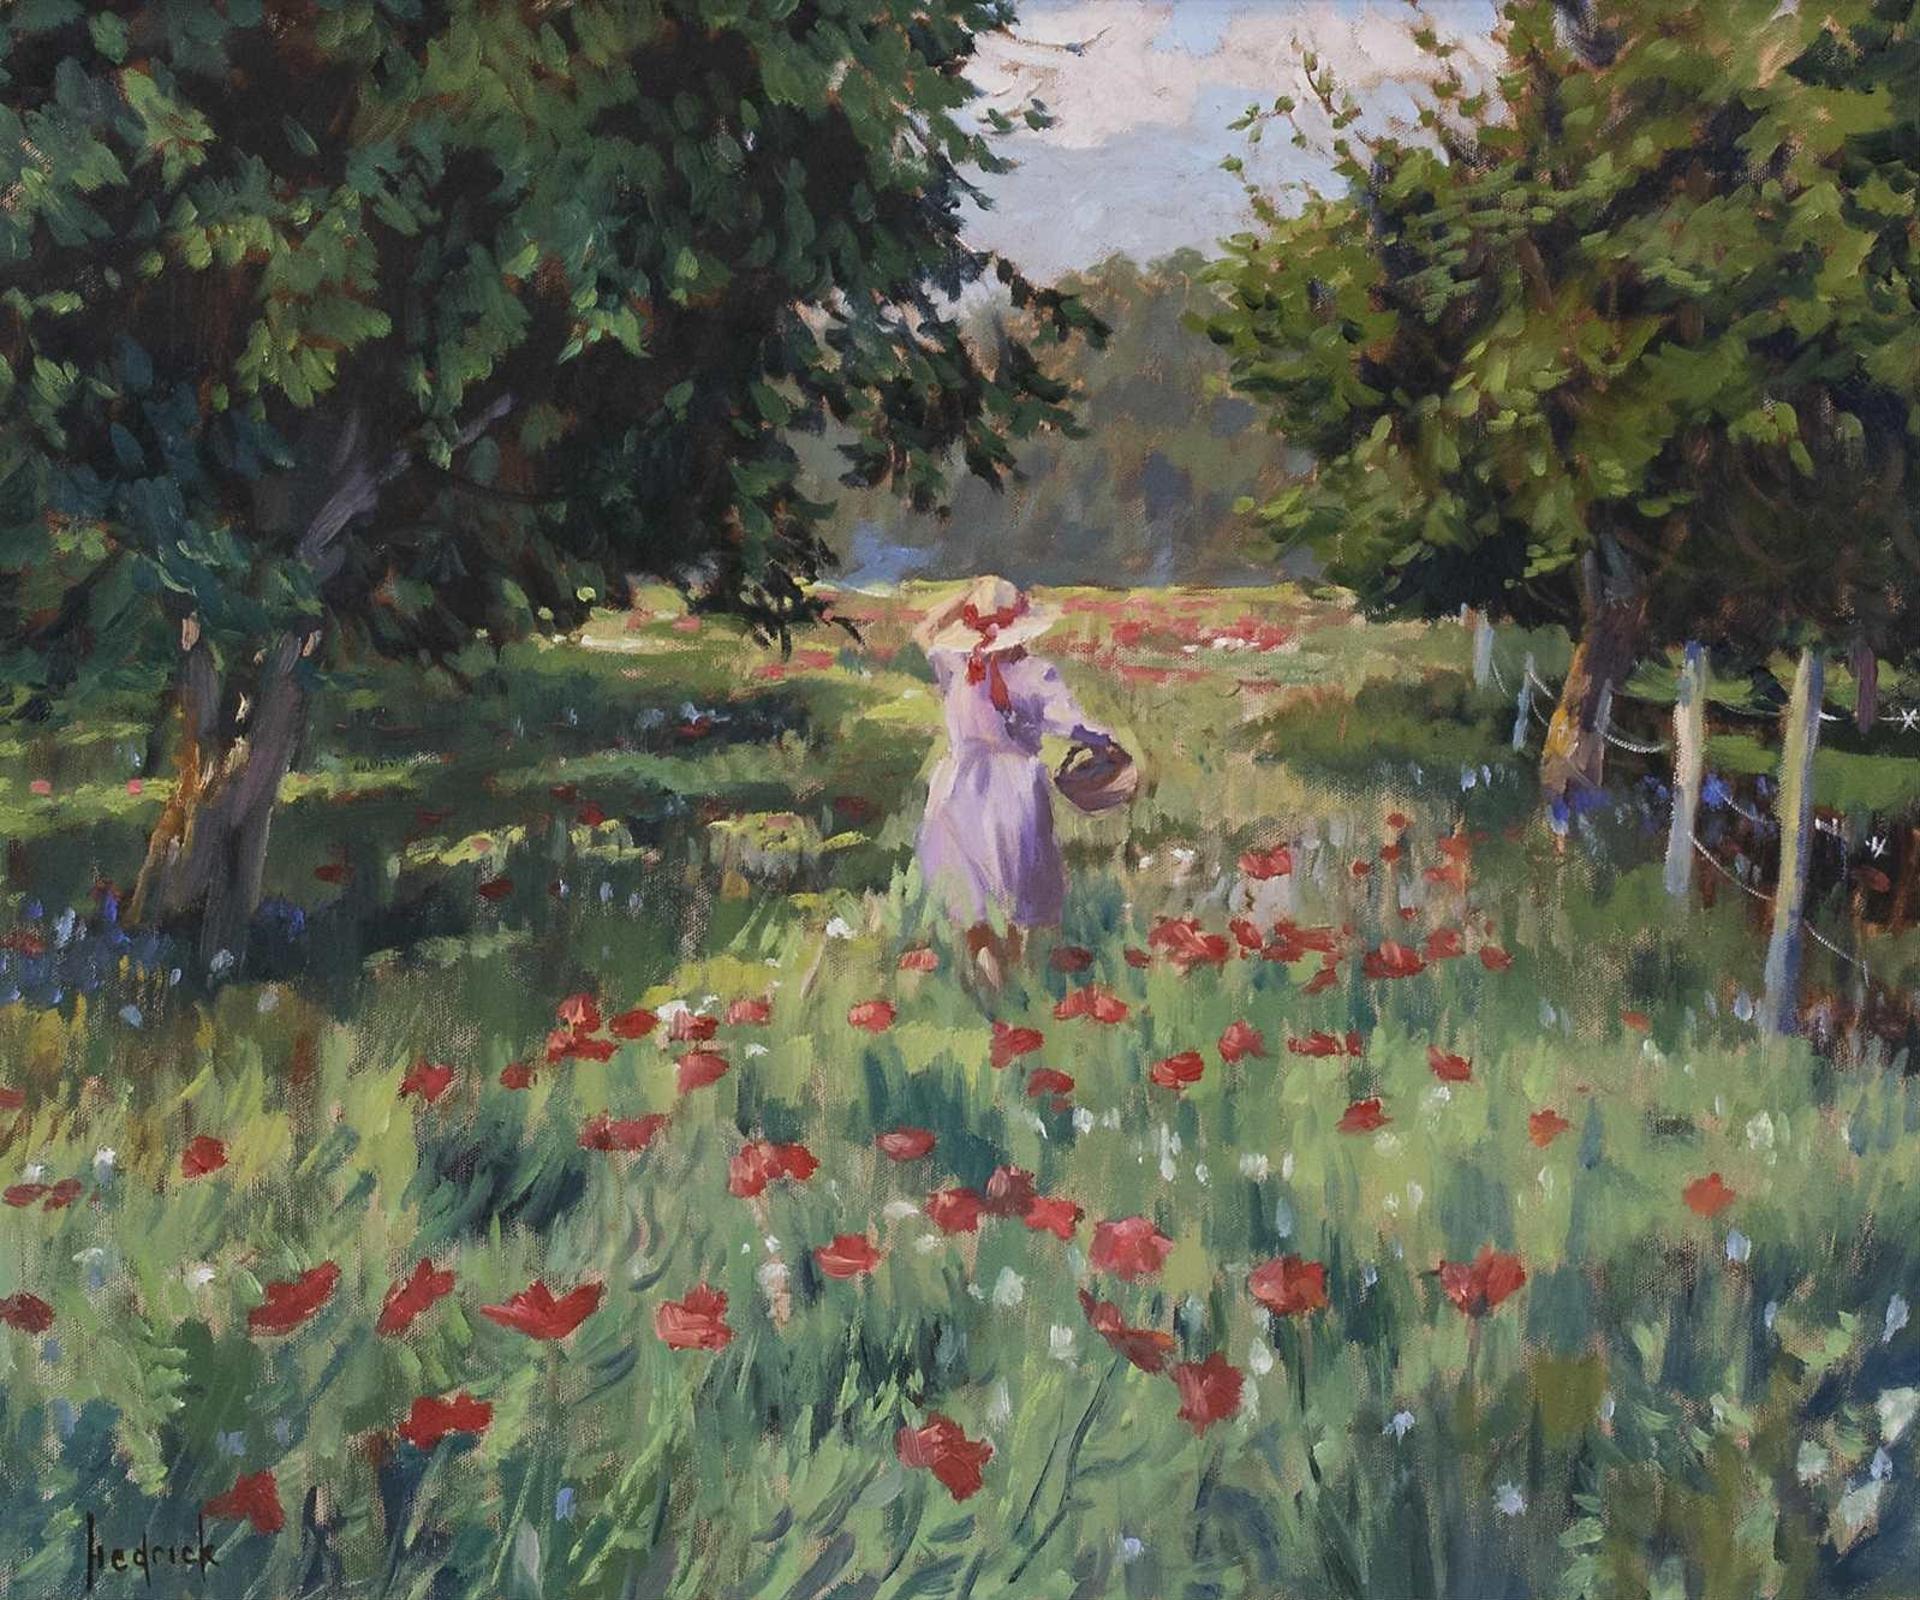 Ron Hedrick (1942) - Girl In Field Of Poppies